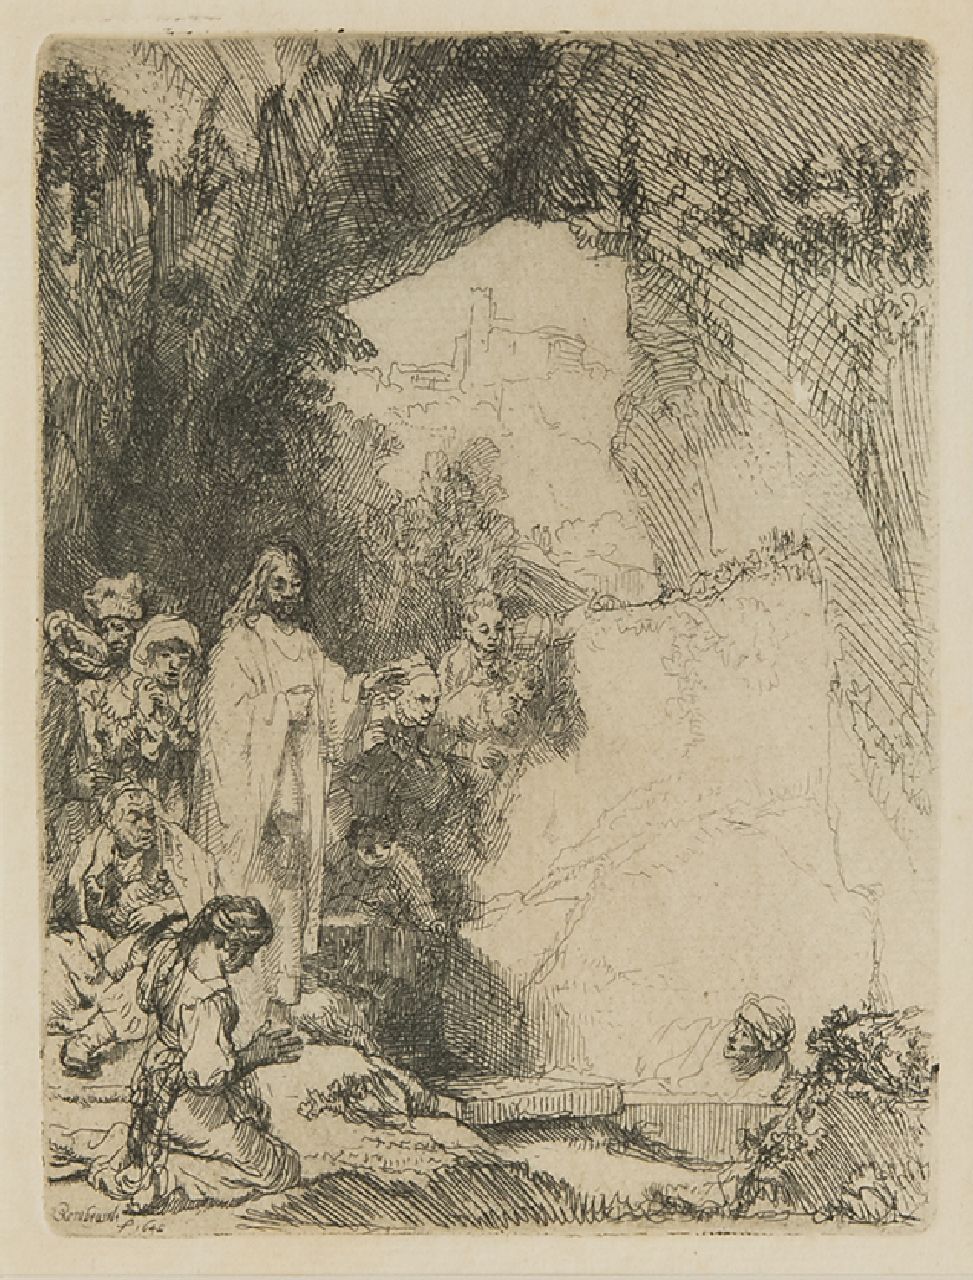 Rembrandt (Rembrandt Harmensz. van Rijn)   | Rembrandt (Rembrandt Harmensz. van Rijn), The raising of Lazarus, etching 15.0 x 11.4 cm, signed l.l. in the plate and dated in the plate 1642